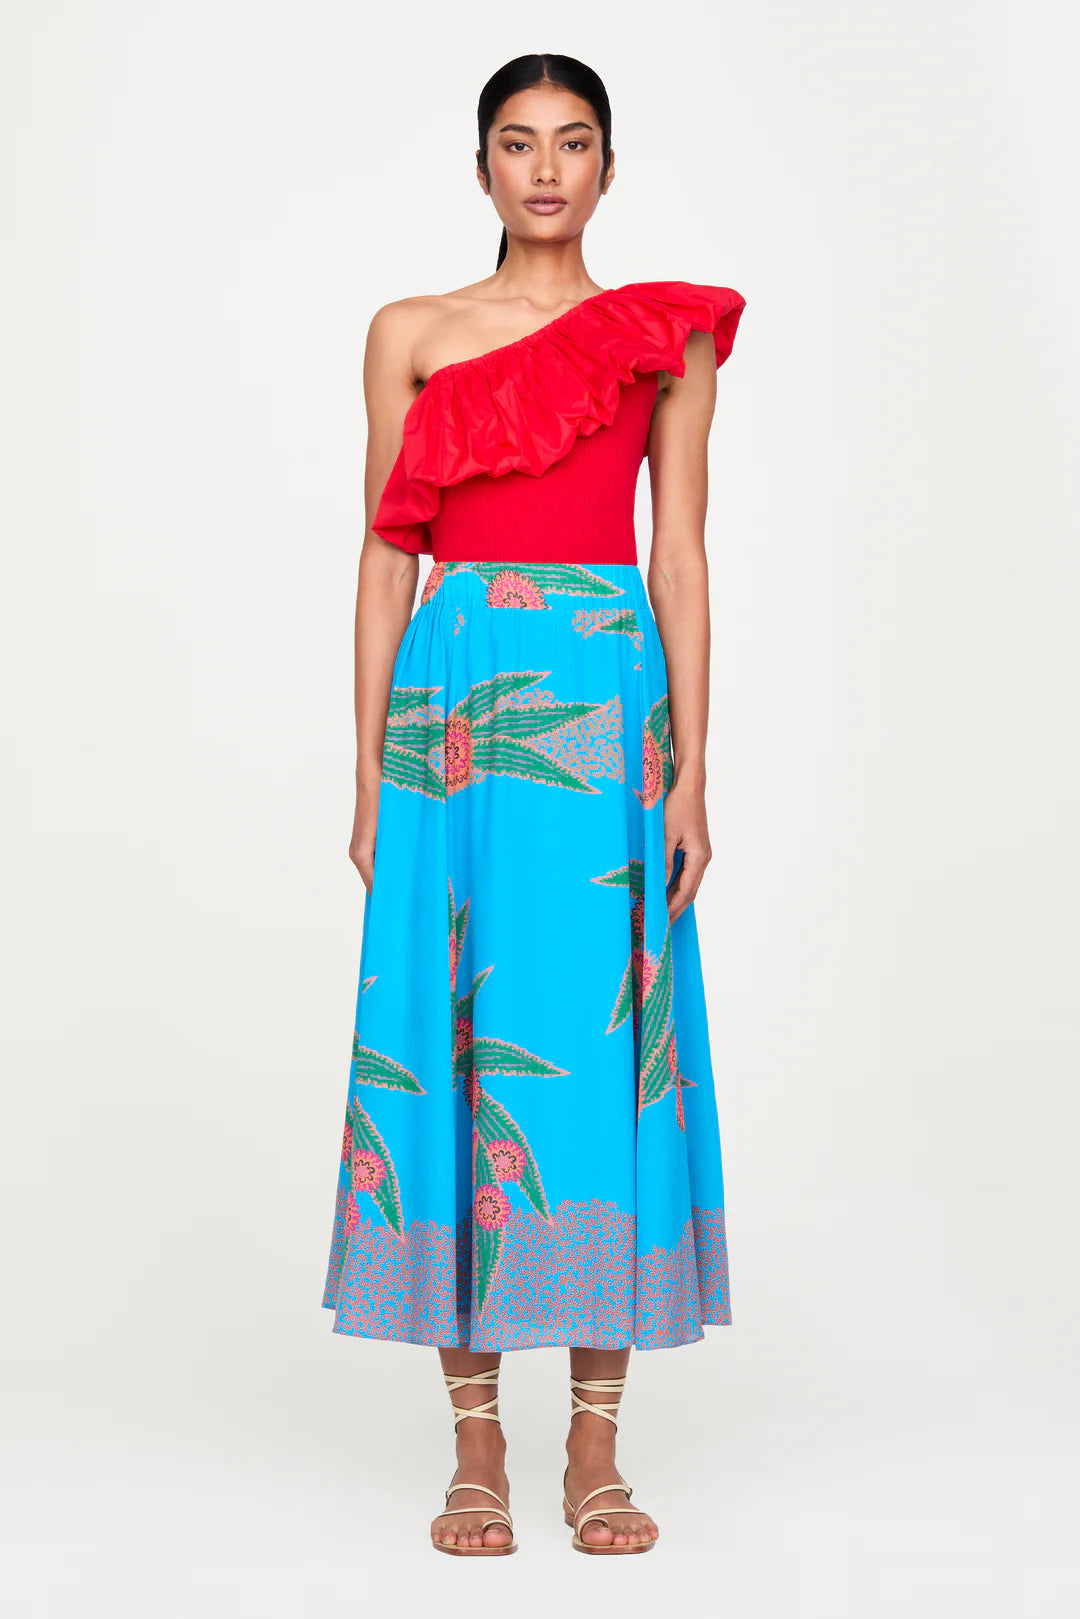 Sasha Skirt by Marie Oliver in Peacock